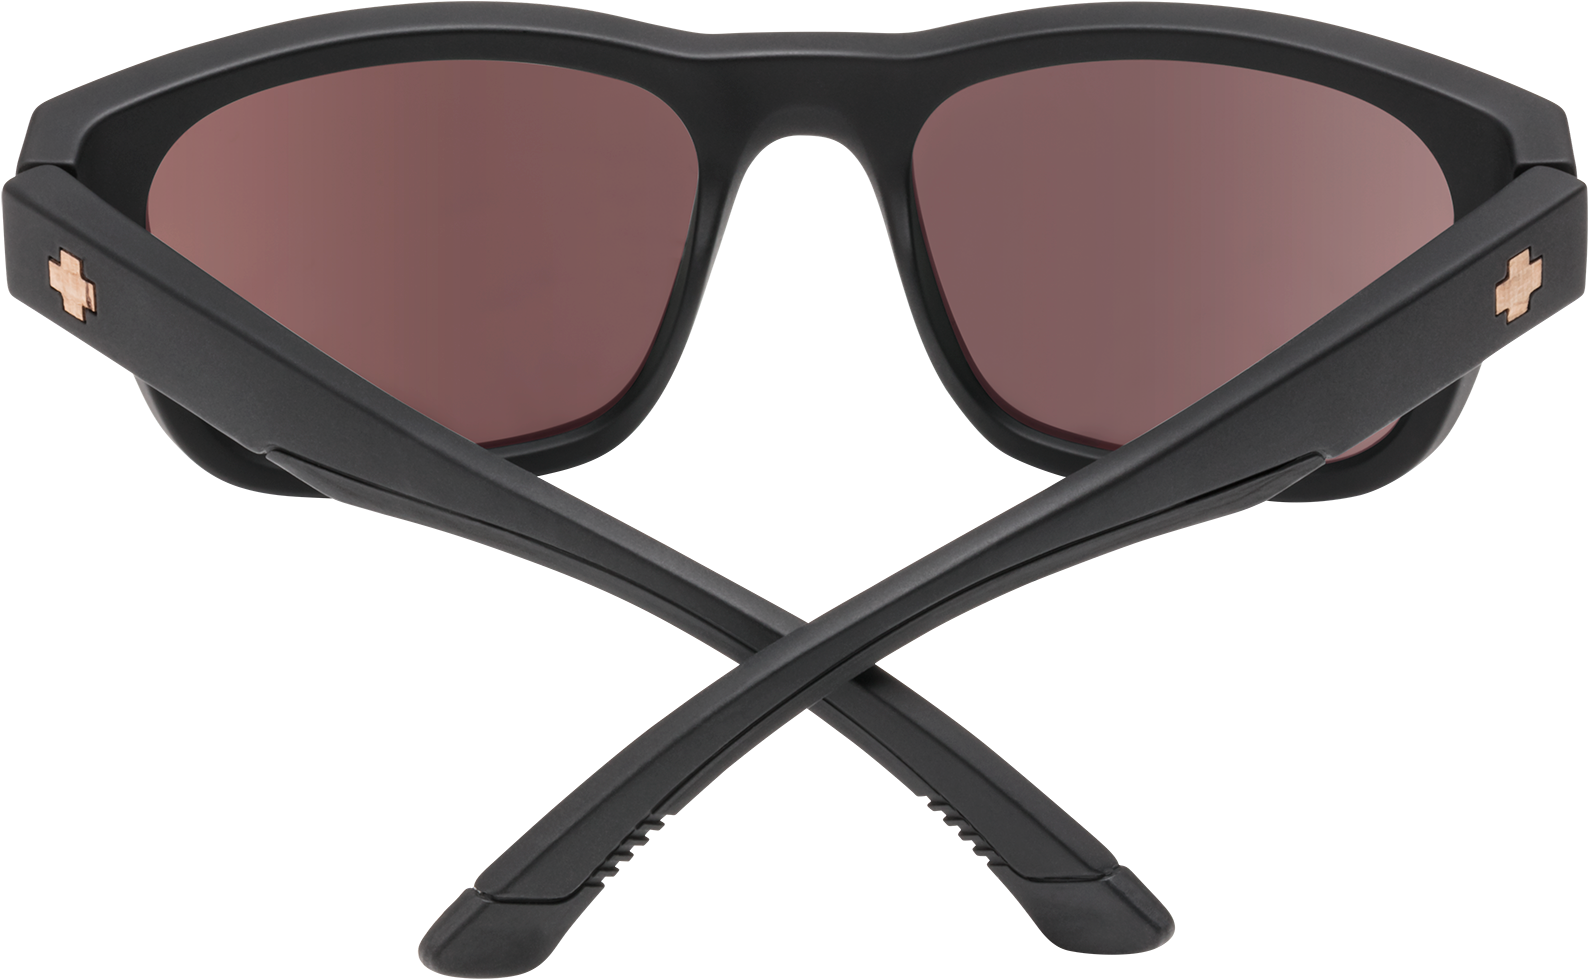 A Pair Of Sunglasses With Pink Lenses